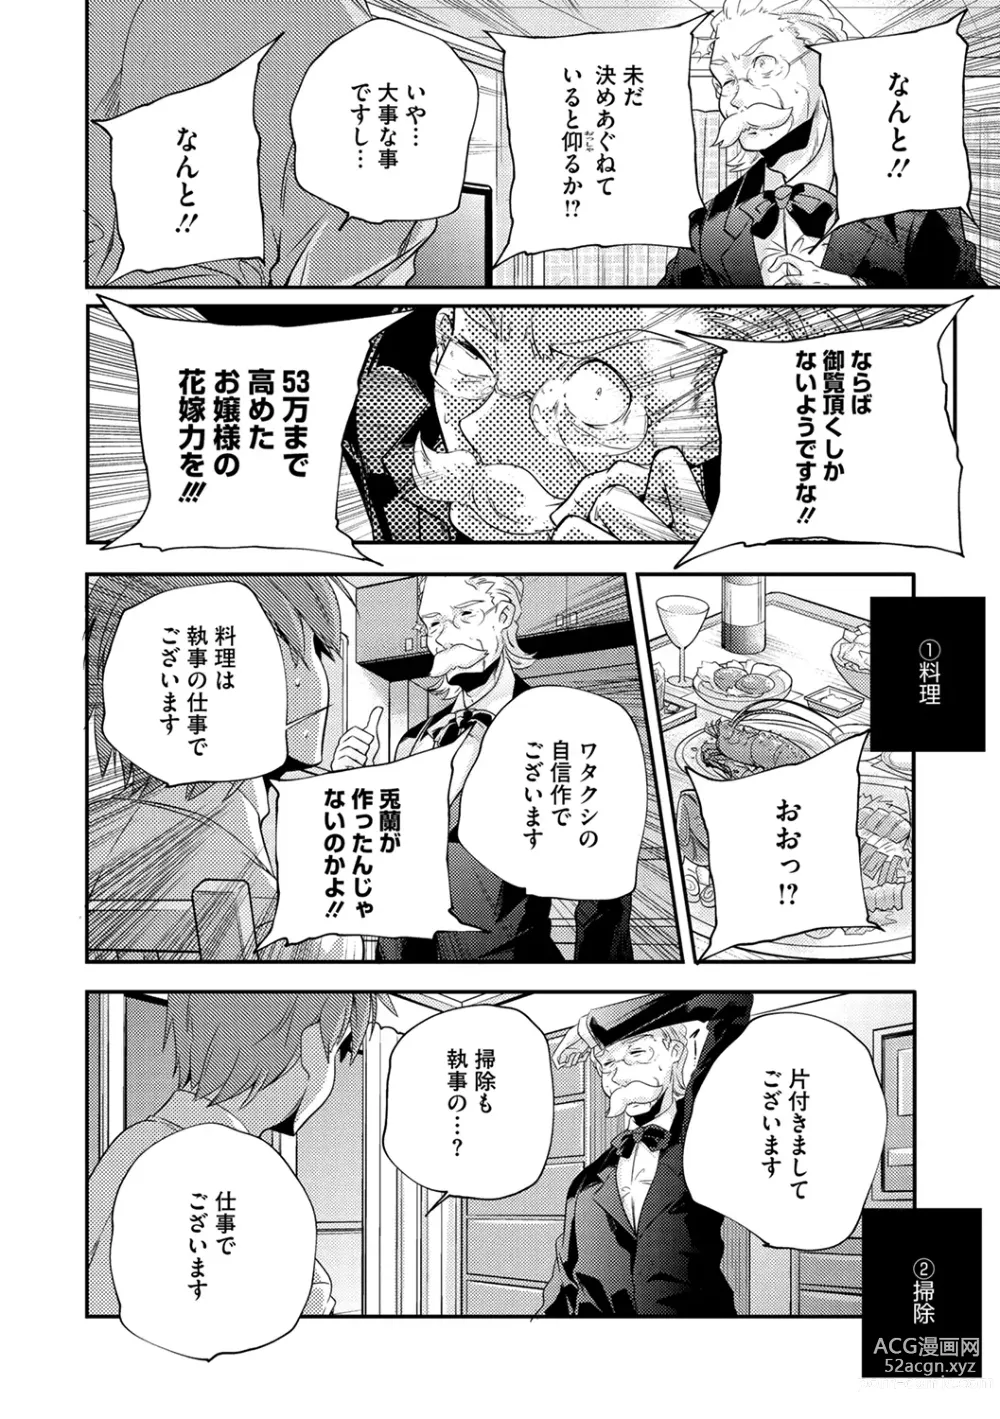 Page 26 of manga LQ -Little Queen- Vol. 52